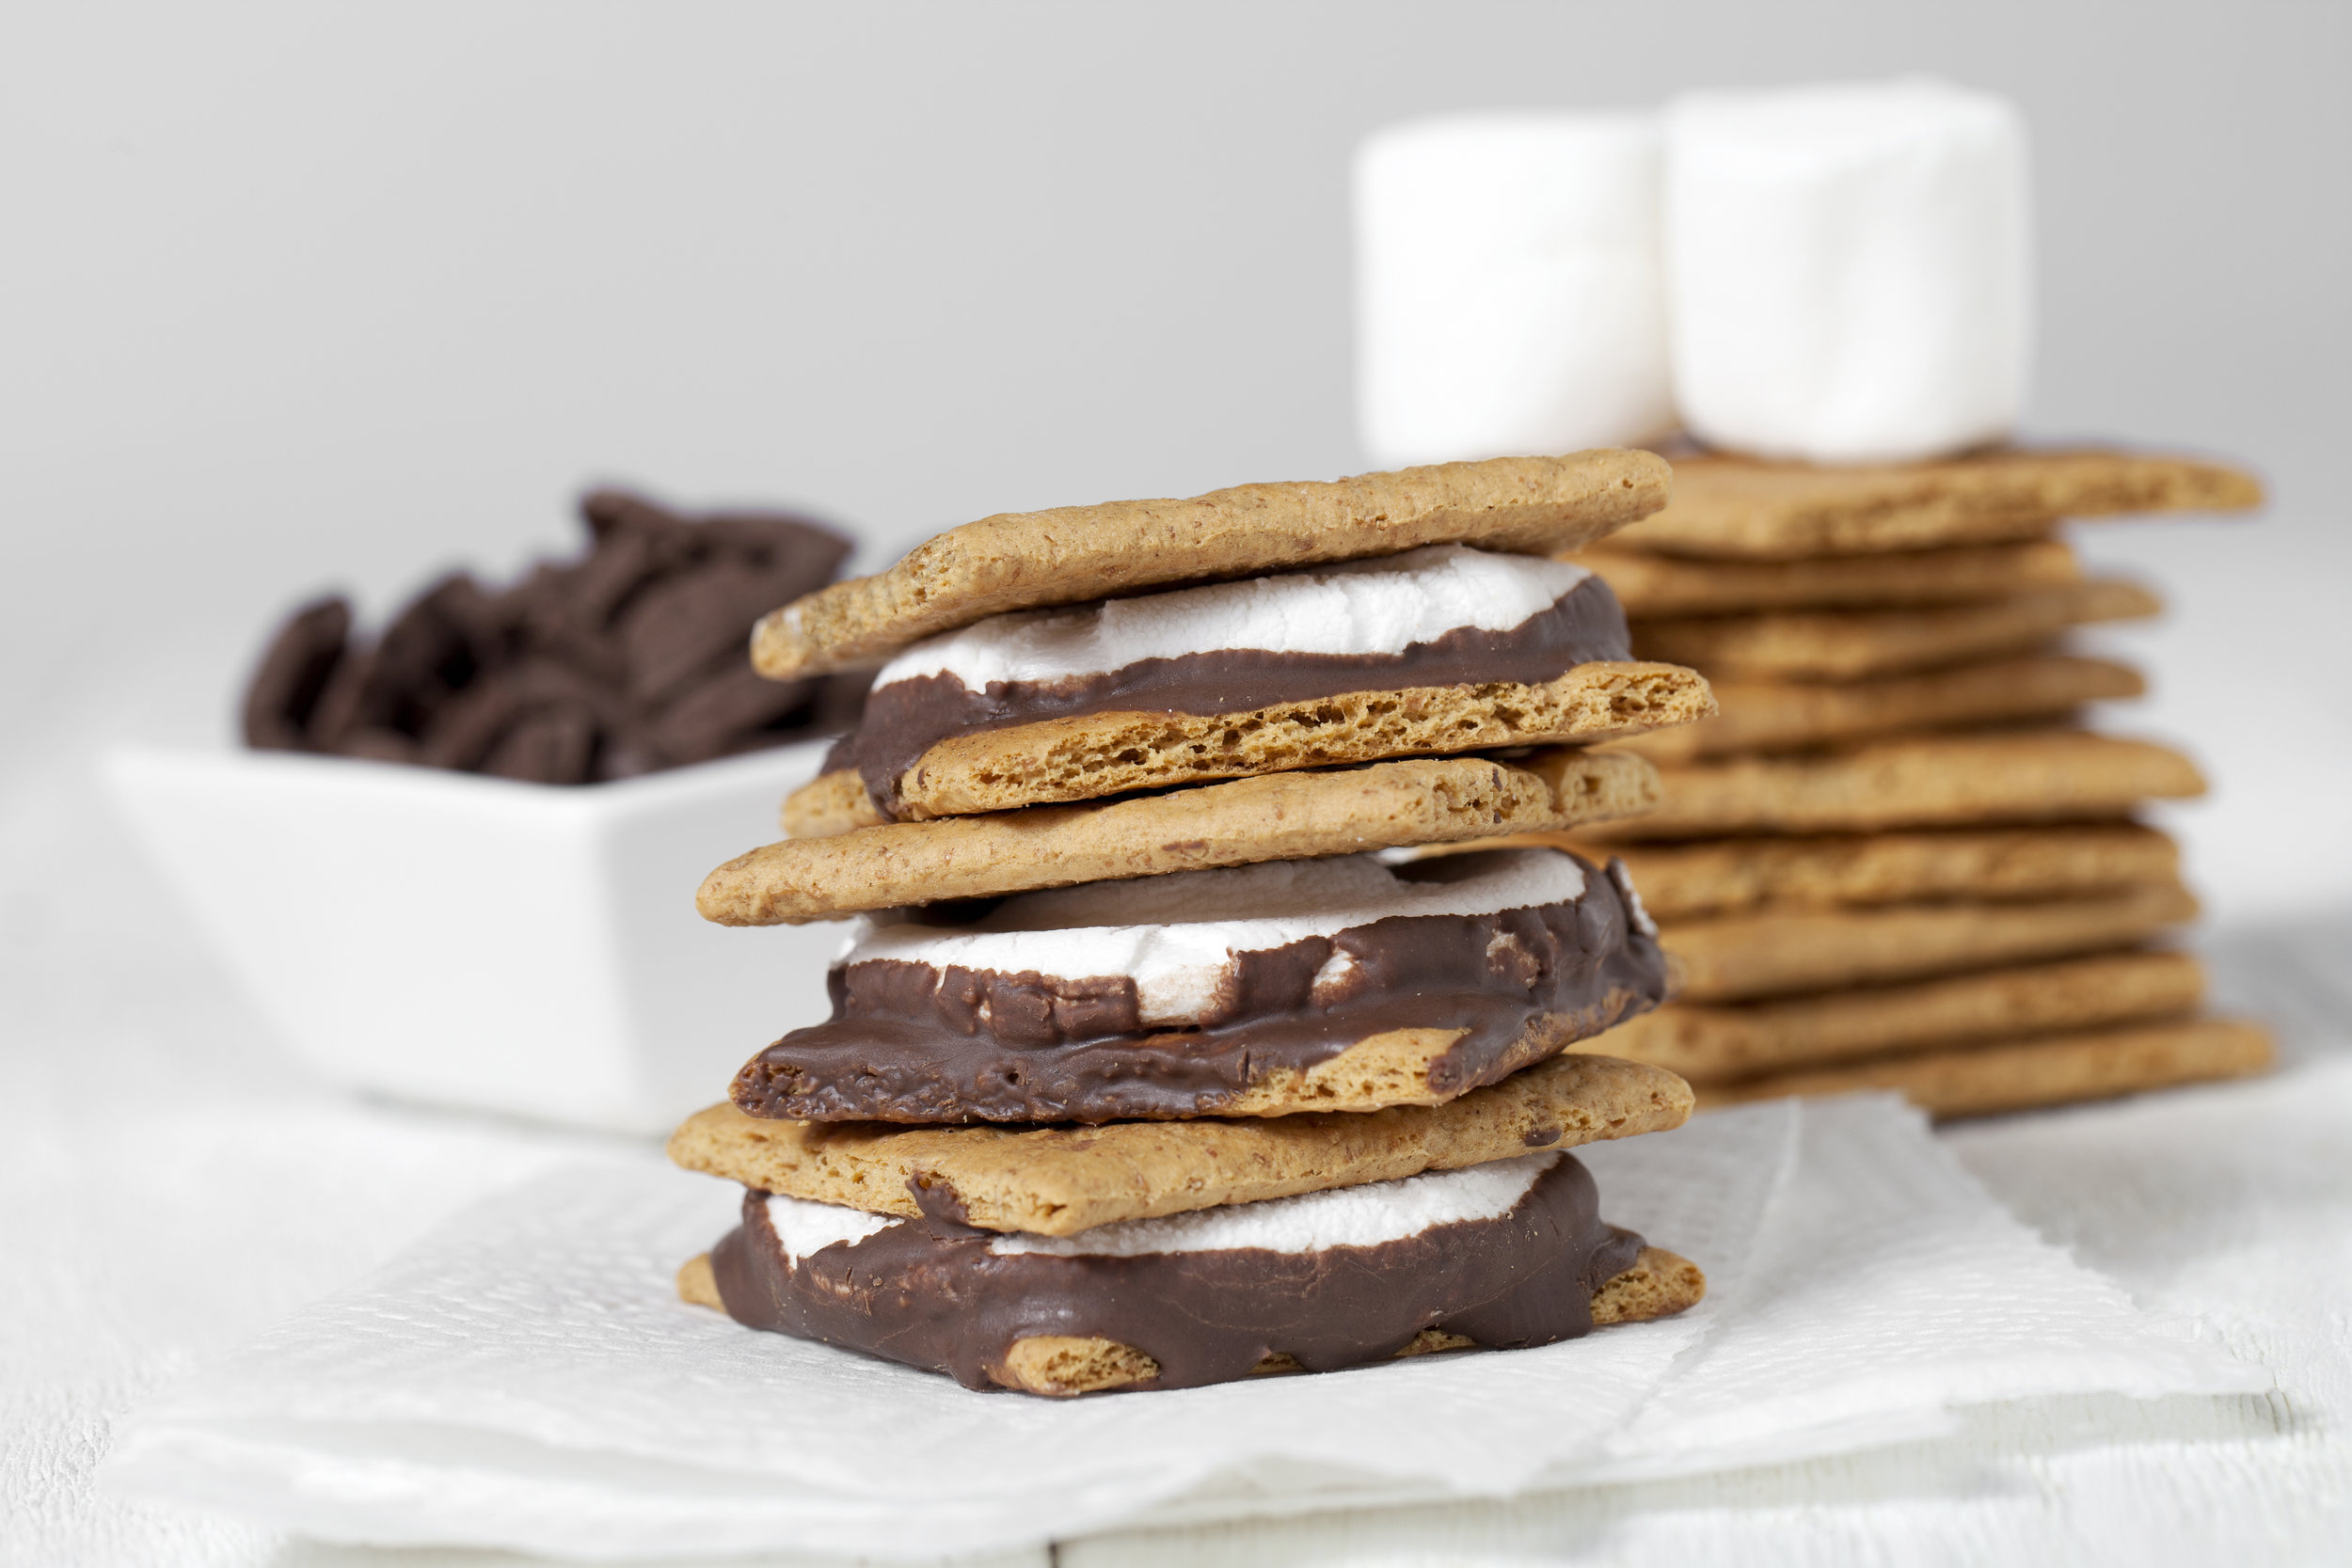  smores sandwich with marshmallow chocolate and crackers 